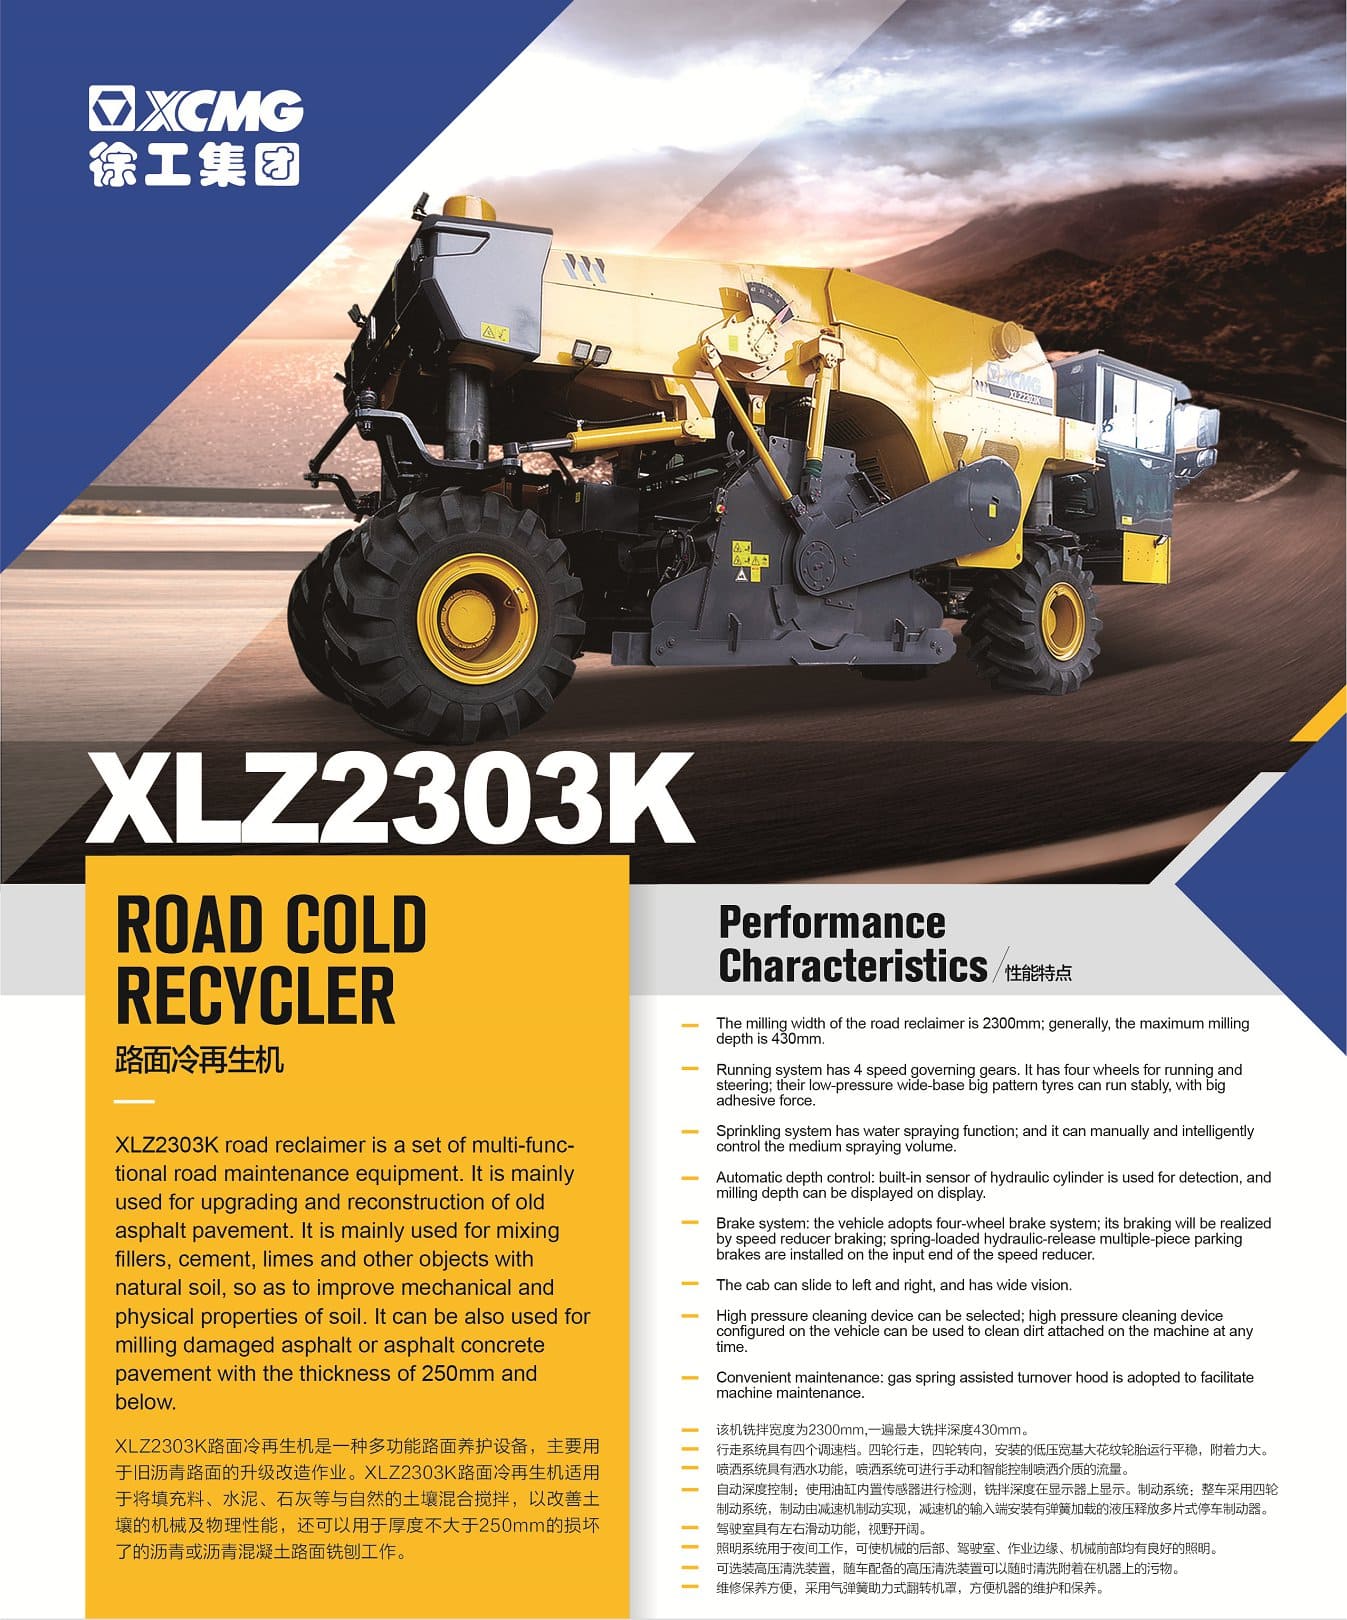 XCMG Official Road Cold Recycler XLZ2303K For Sale